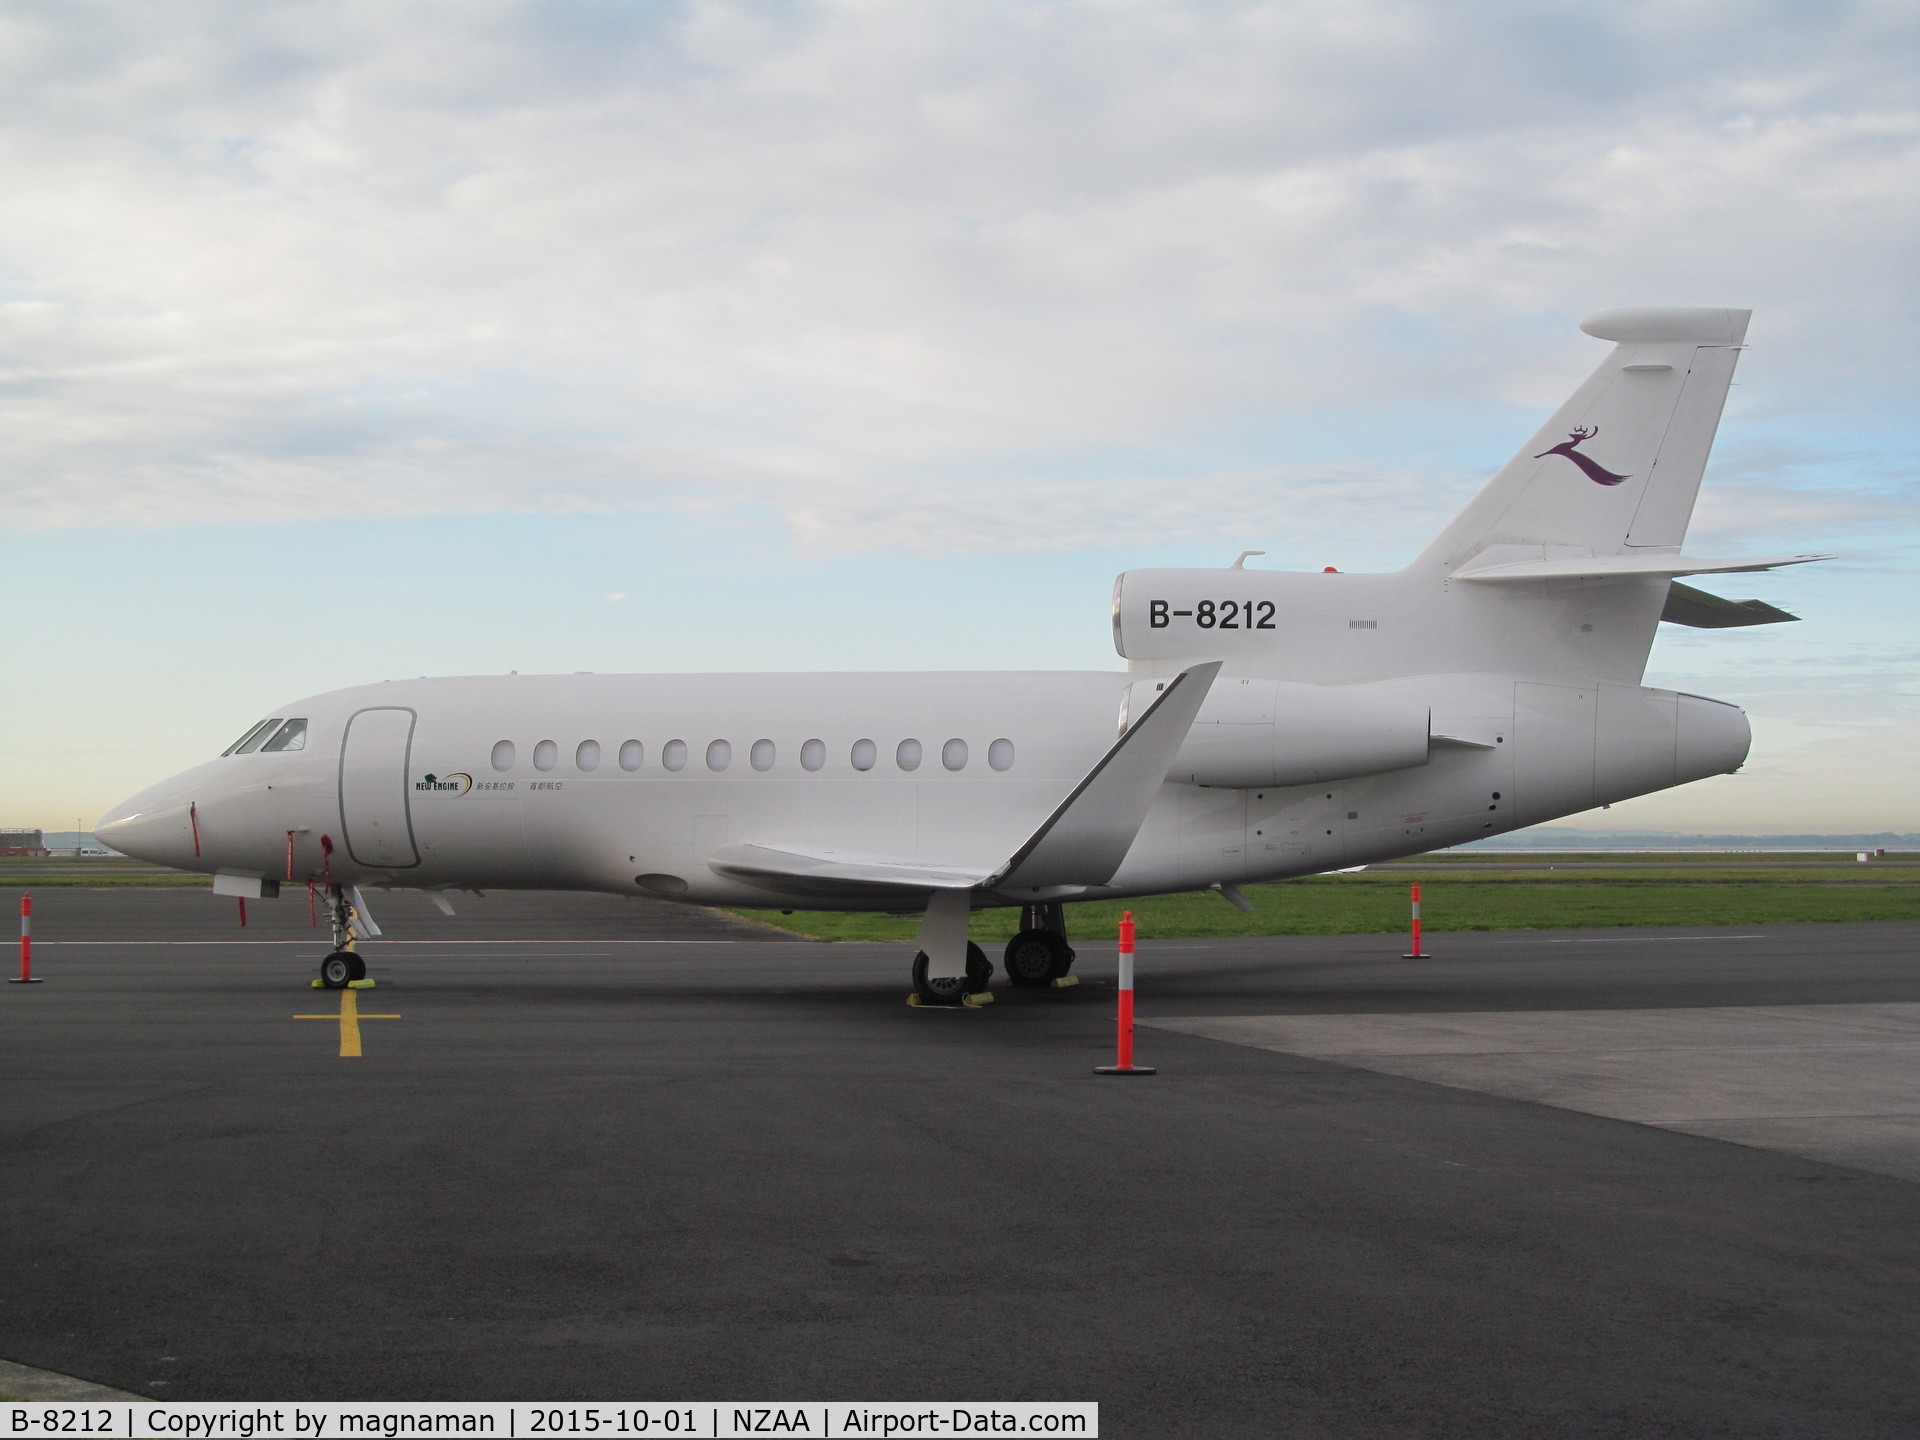 B-8212, 2013 Dassault Falcon 900EX C/N 276, At AKL - here for a few days.